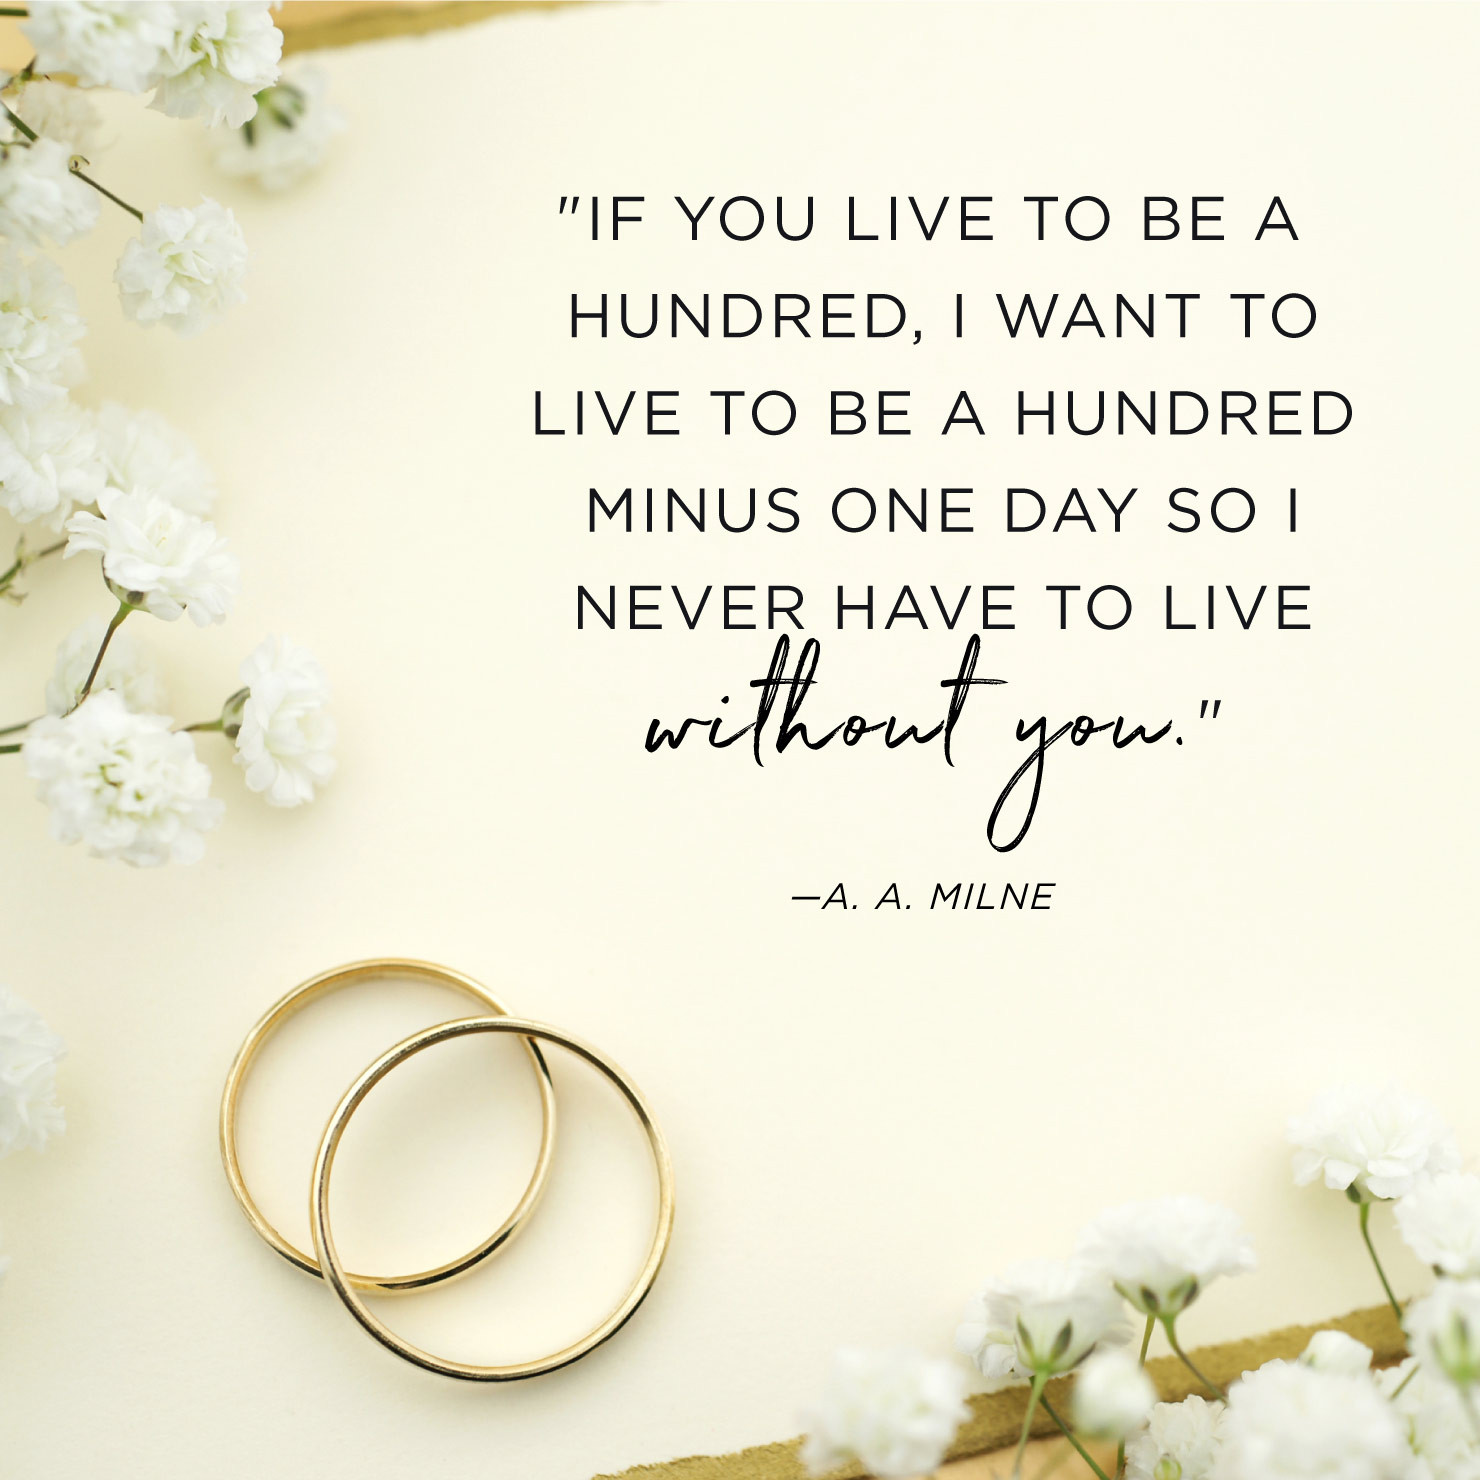 Romantic Anniversary Quotes For Her
 60 Happy Anniversary Quotes to Celebrate Your Love